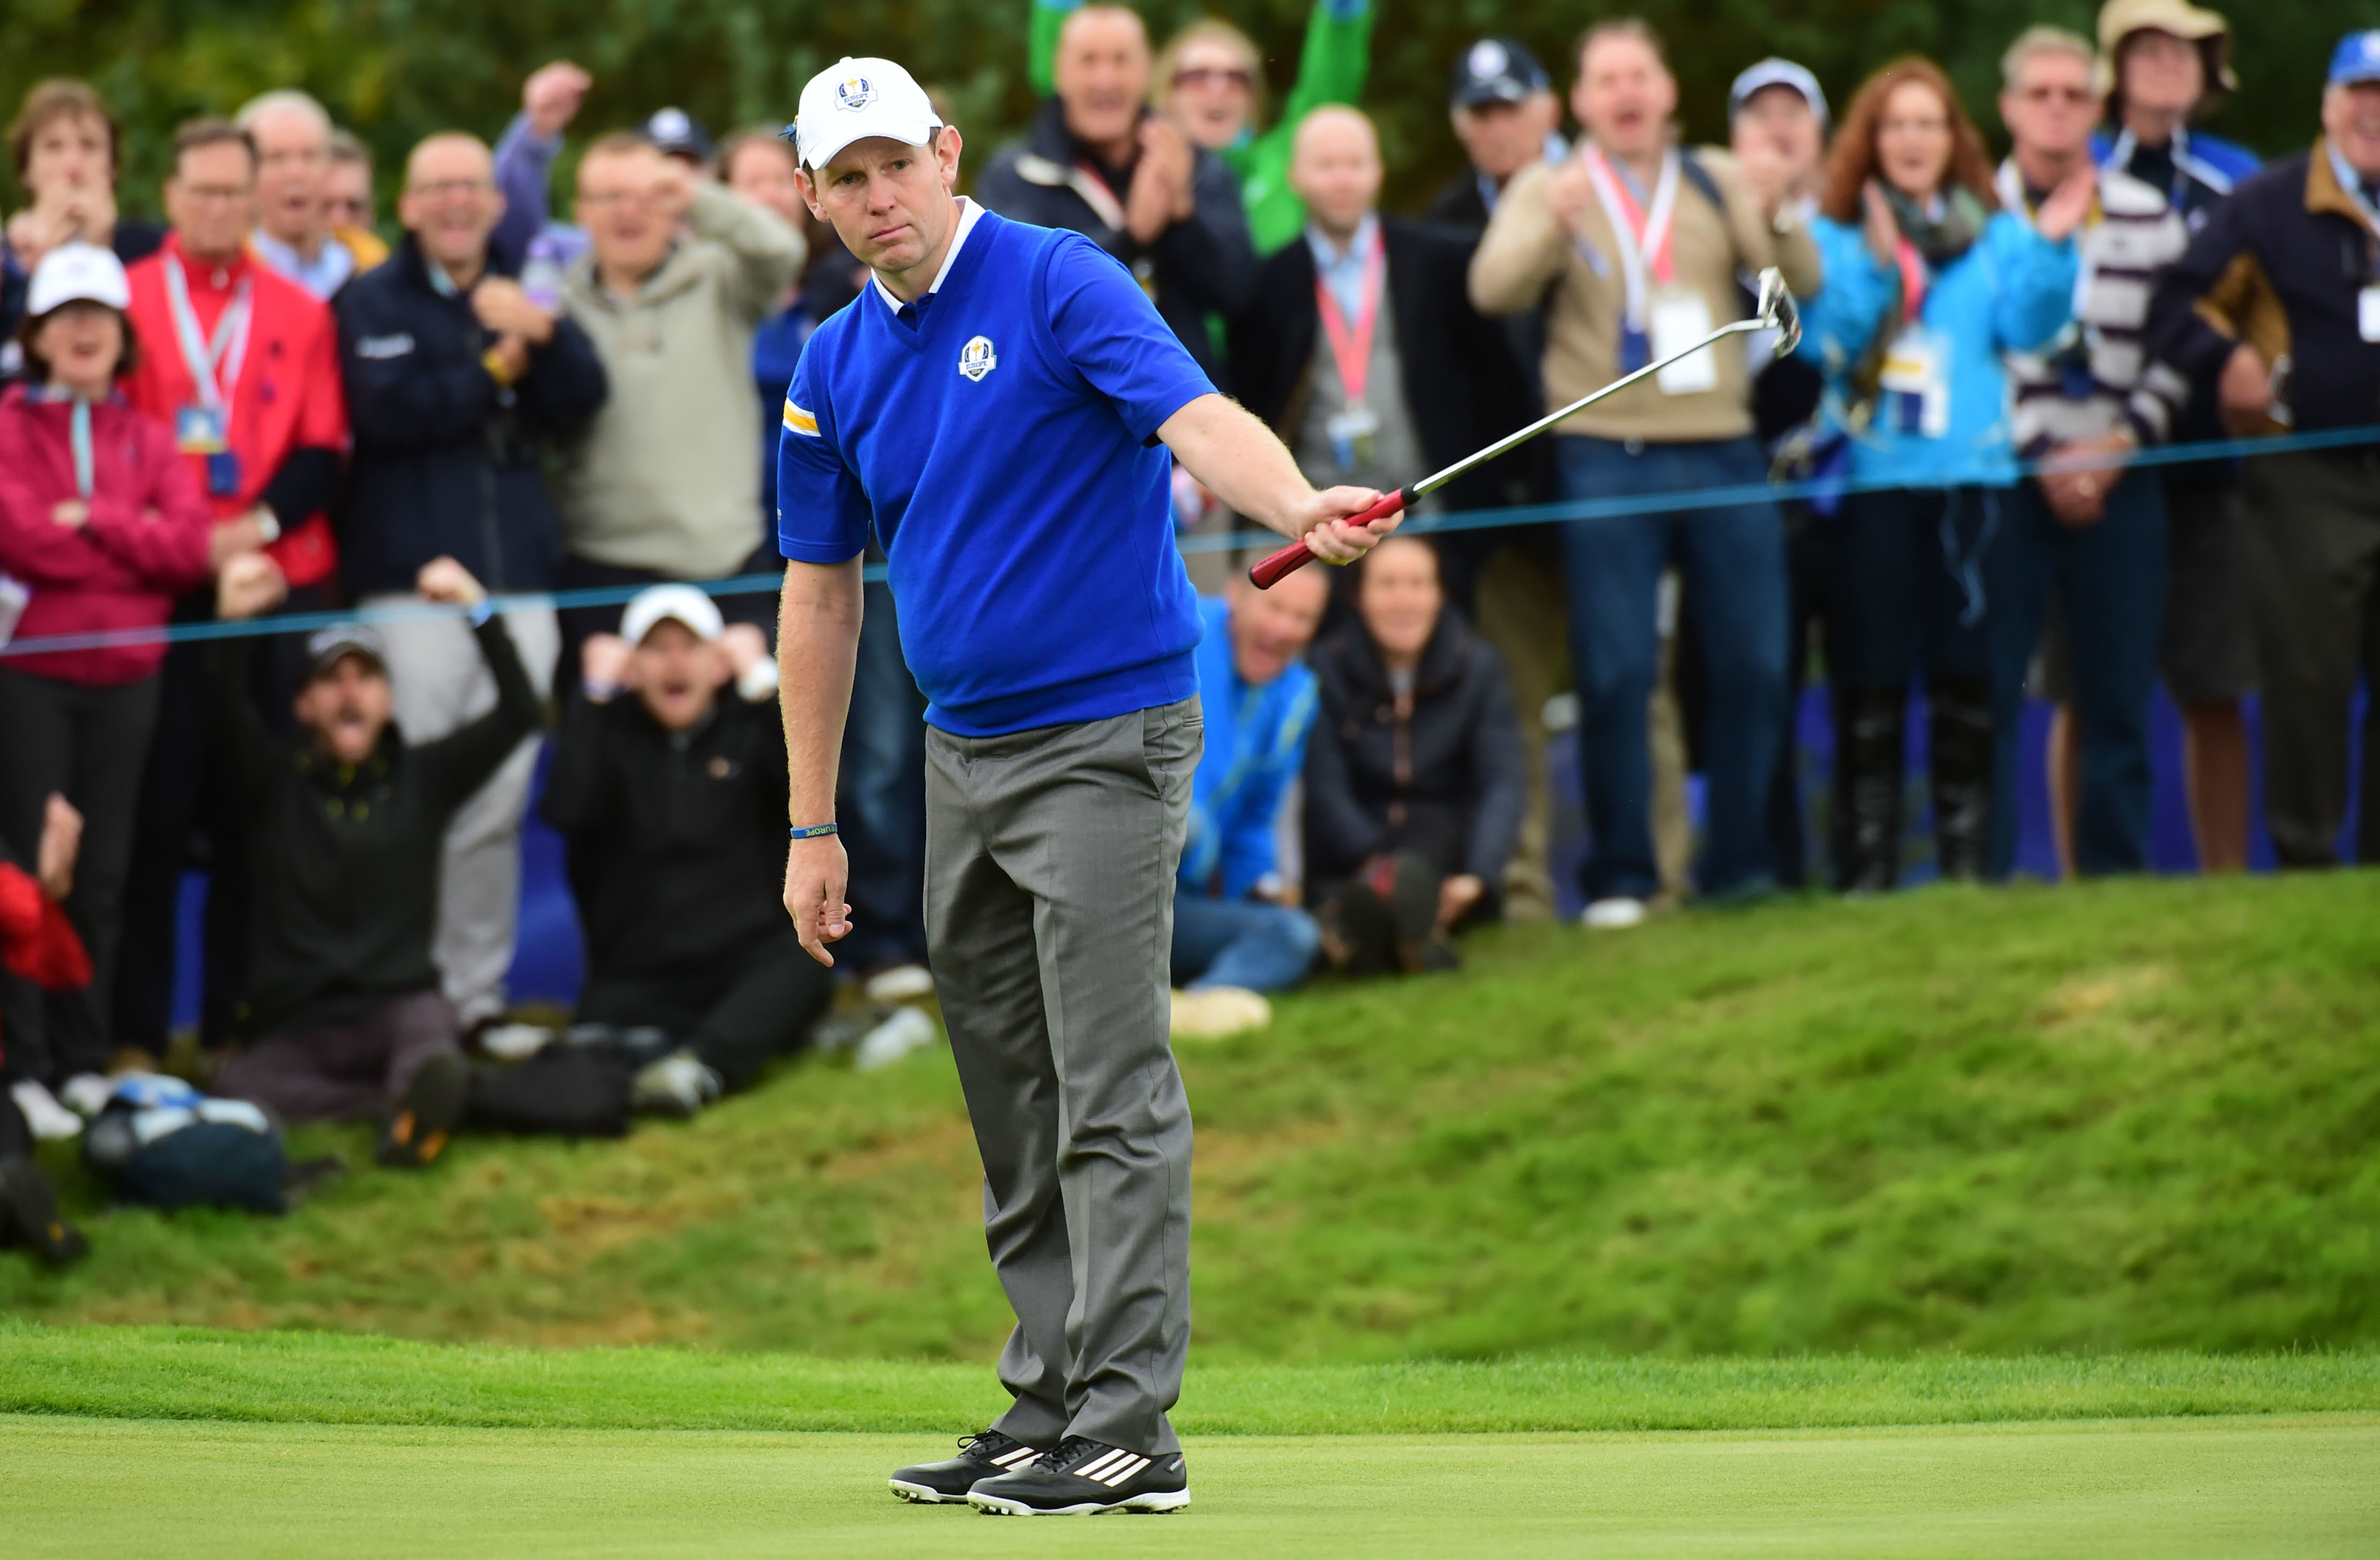 Stephen Gallacher has recovered from a bout of sinusitis to play at the British Masters.